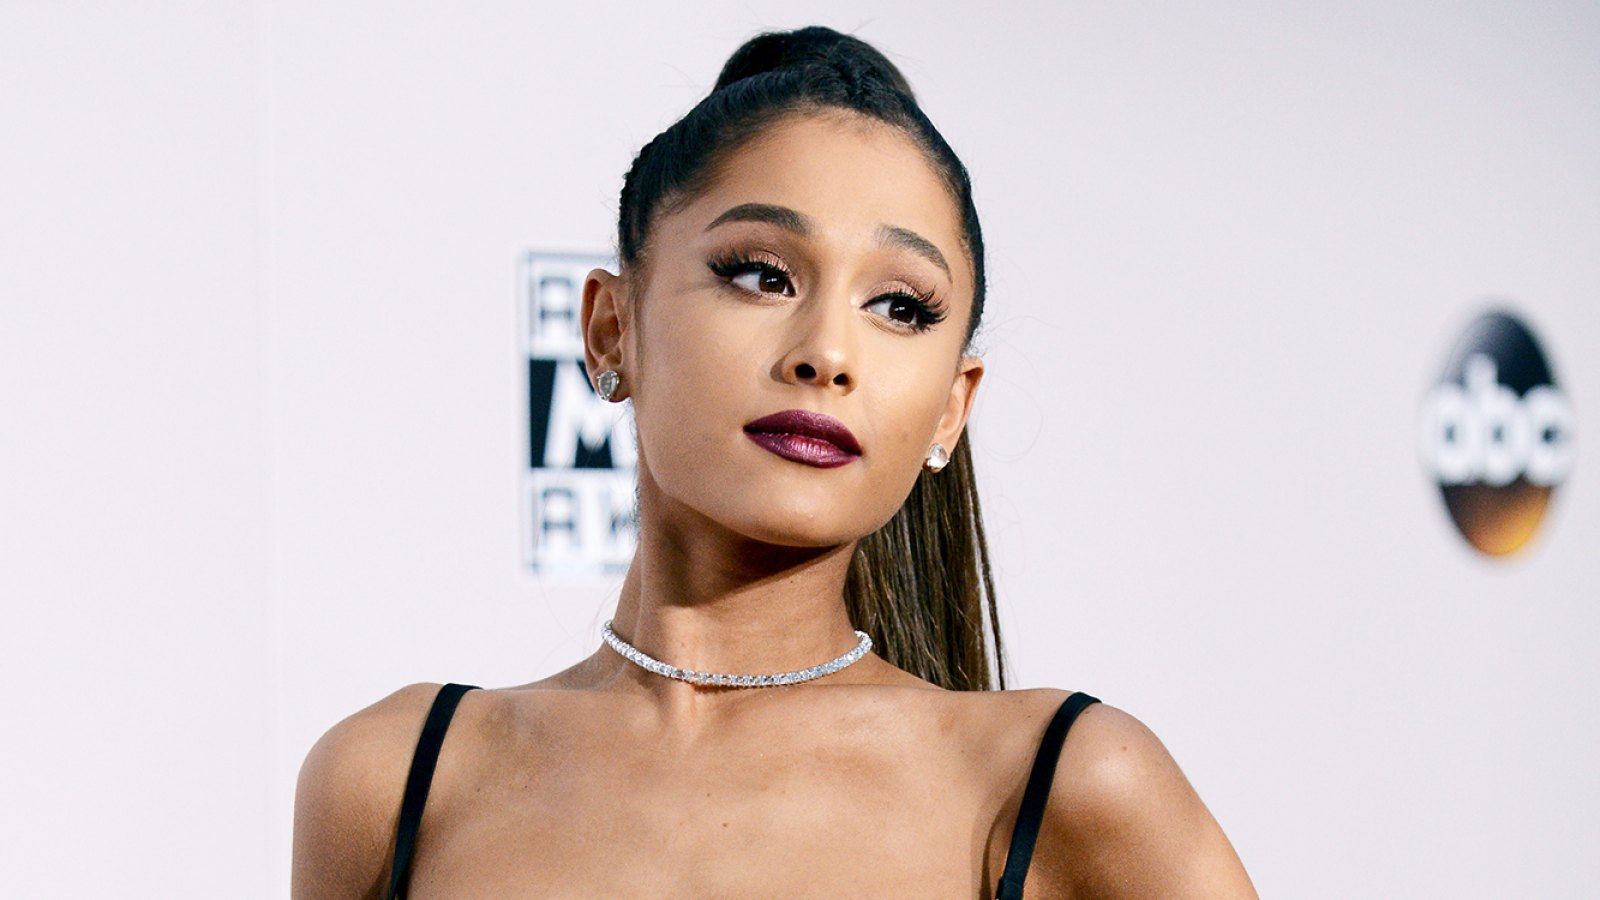 Ariana Grande Covers Up Another Pete Davidson Tattoo, With a Mac Miller Tribute